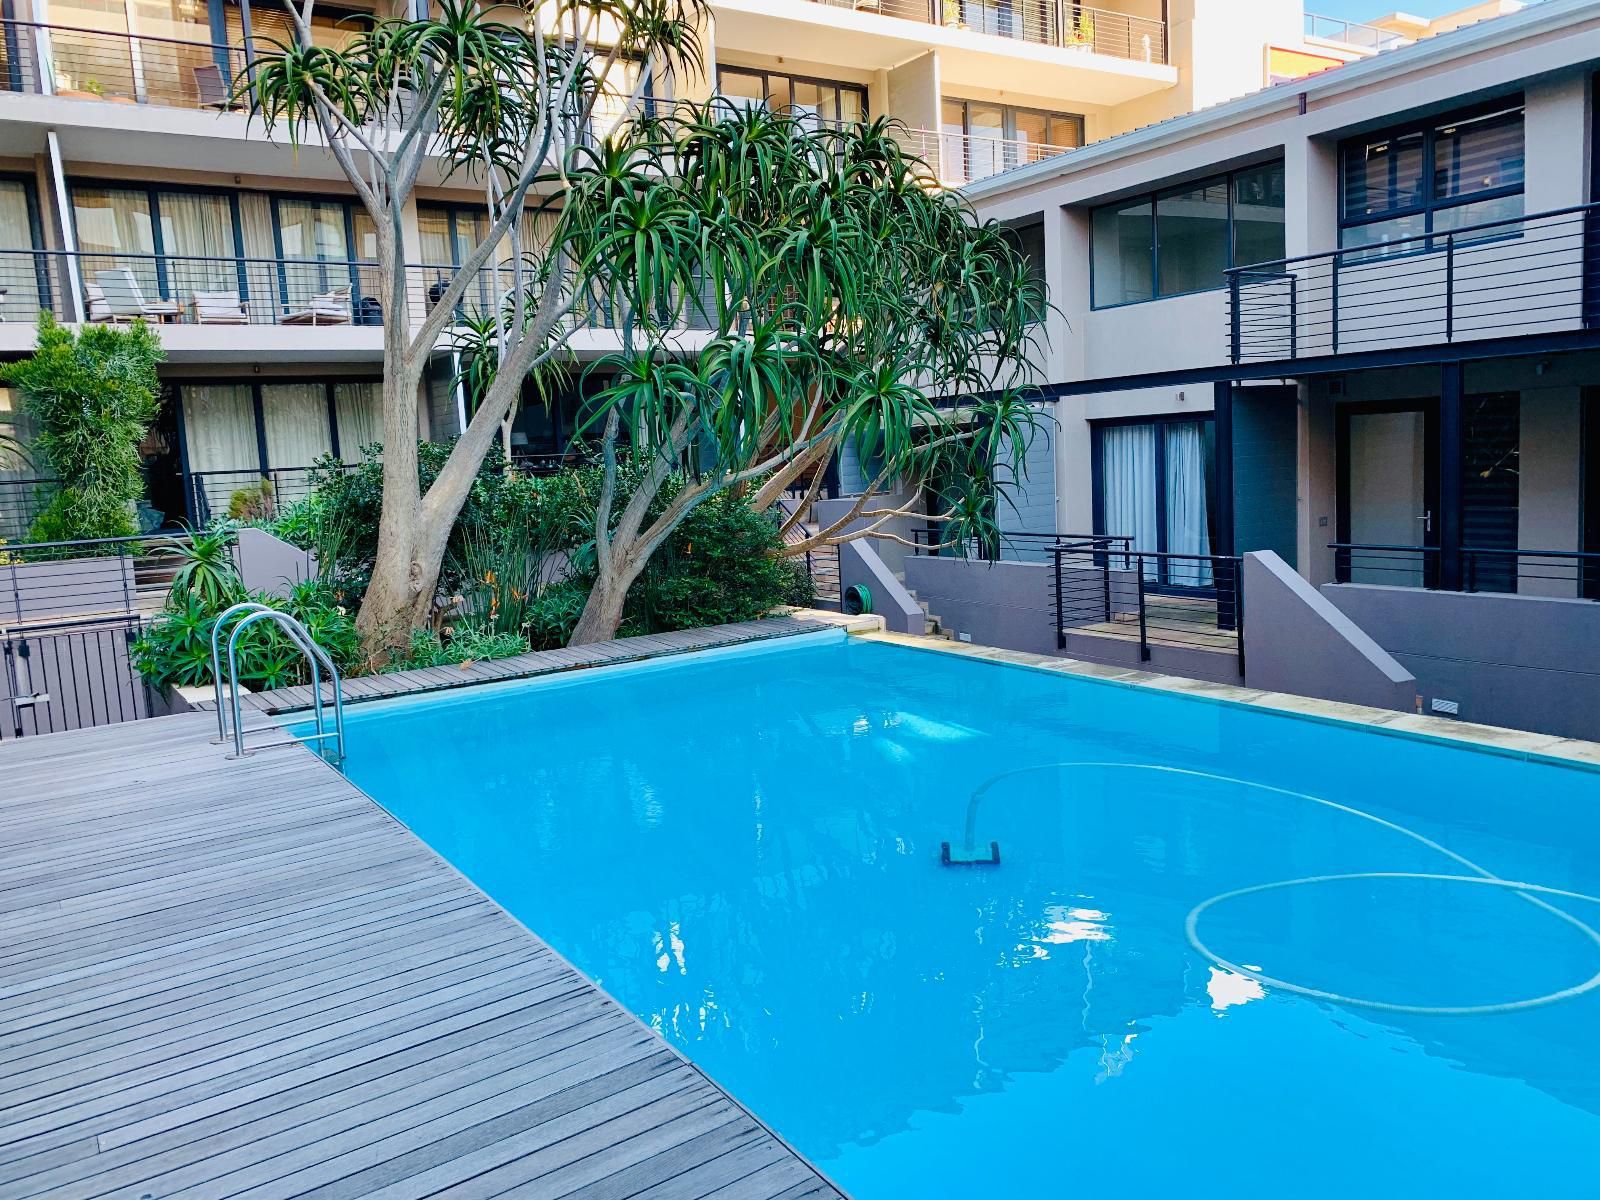 Avenue One Apartments Cape Town City Centre Cape Town Western Cape South Africa House, Building, Architecture, Palm Tree, Plant, Nature, Wood, Swimming Pool